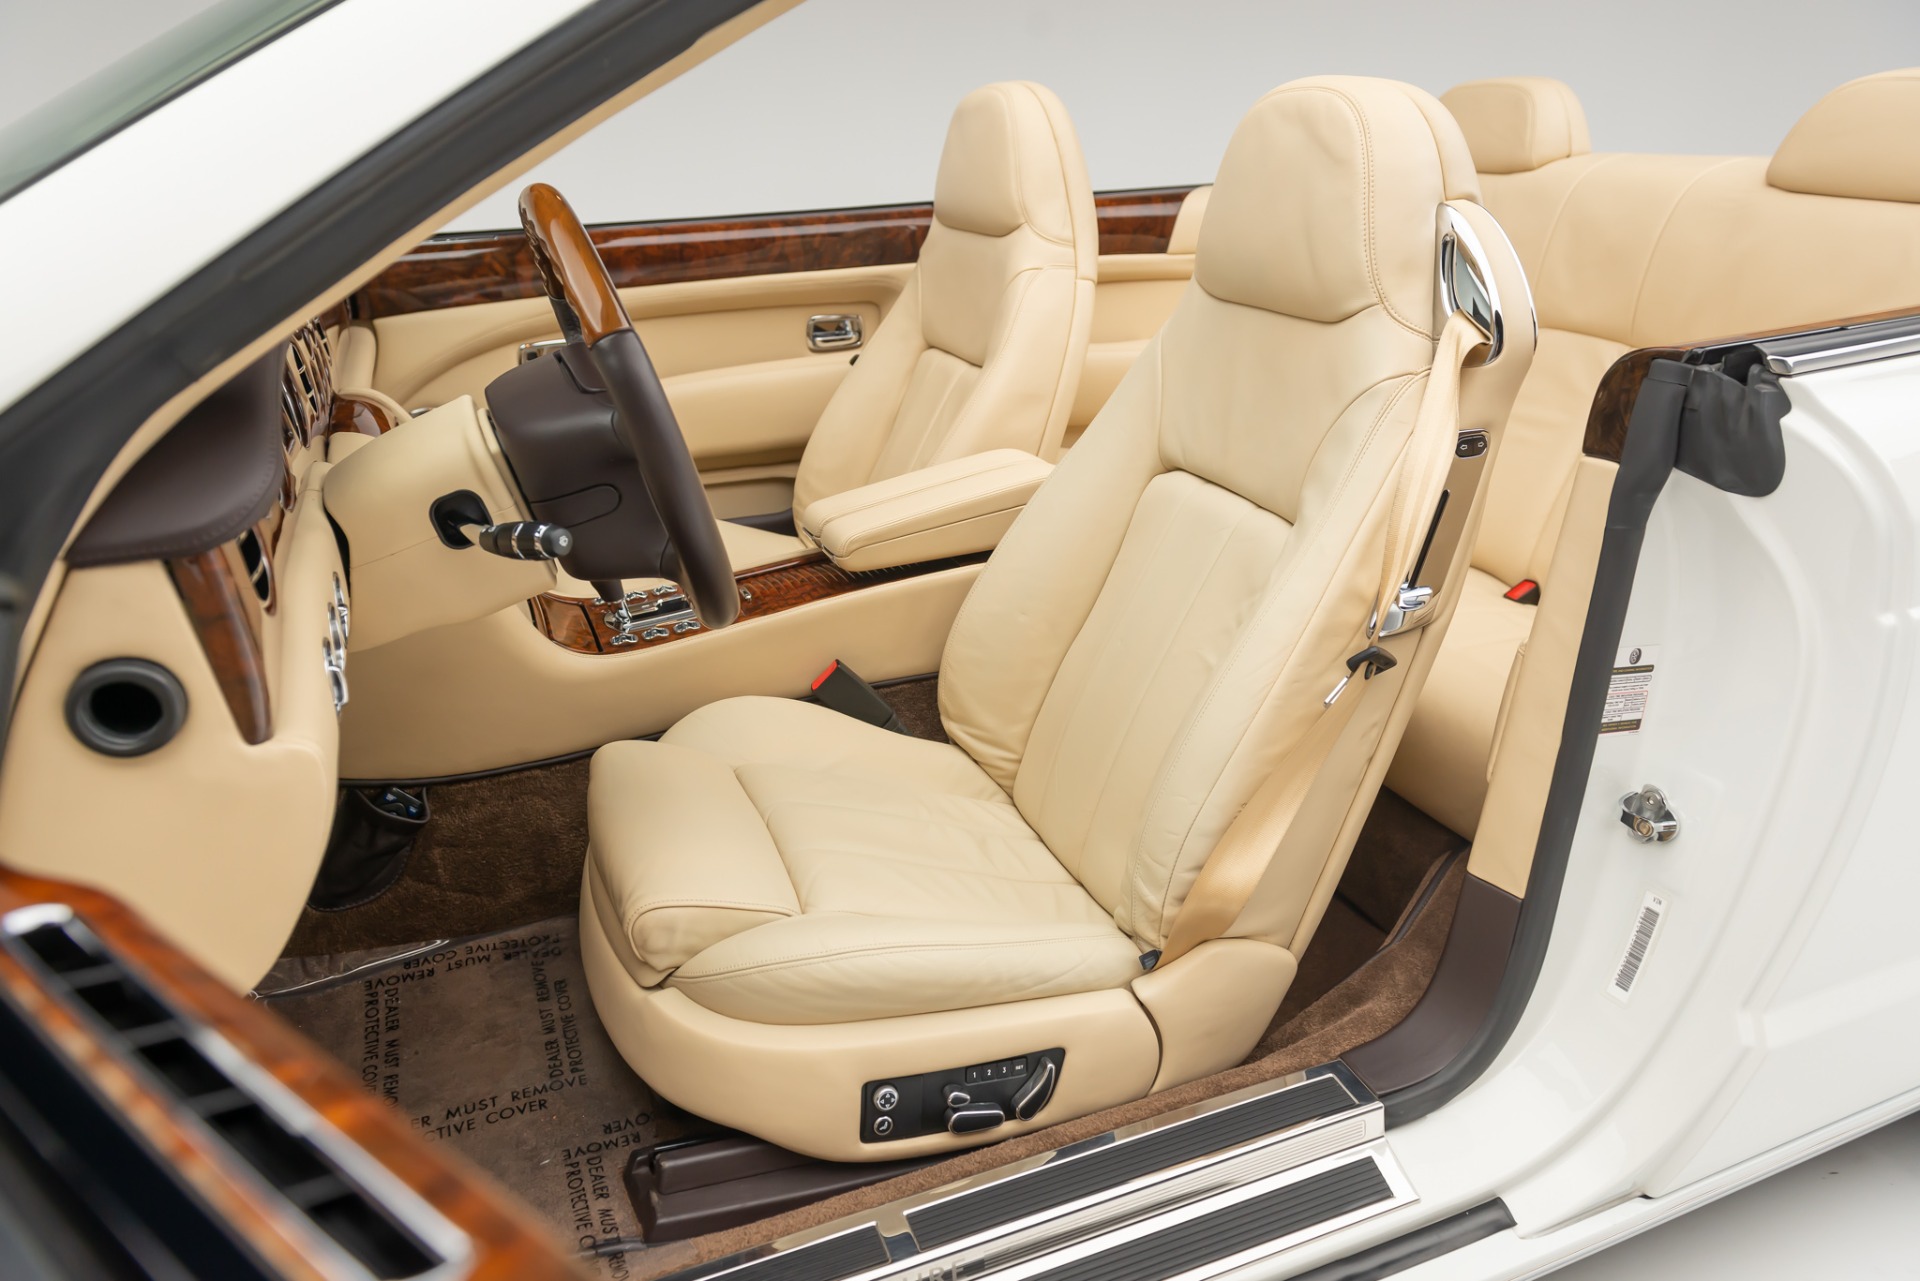 Used 2007 Bentley Azure For Sale ($119,995) | Private Collection Motors Inc  Stock #B6137